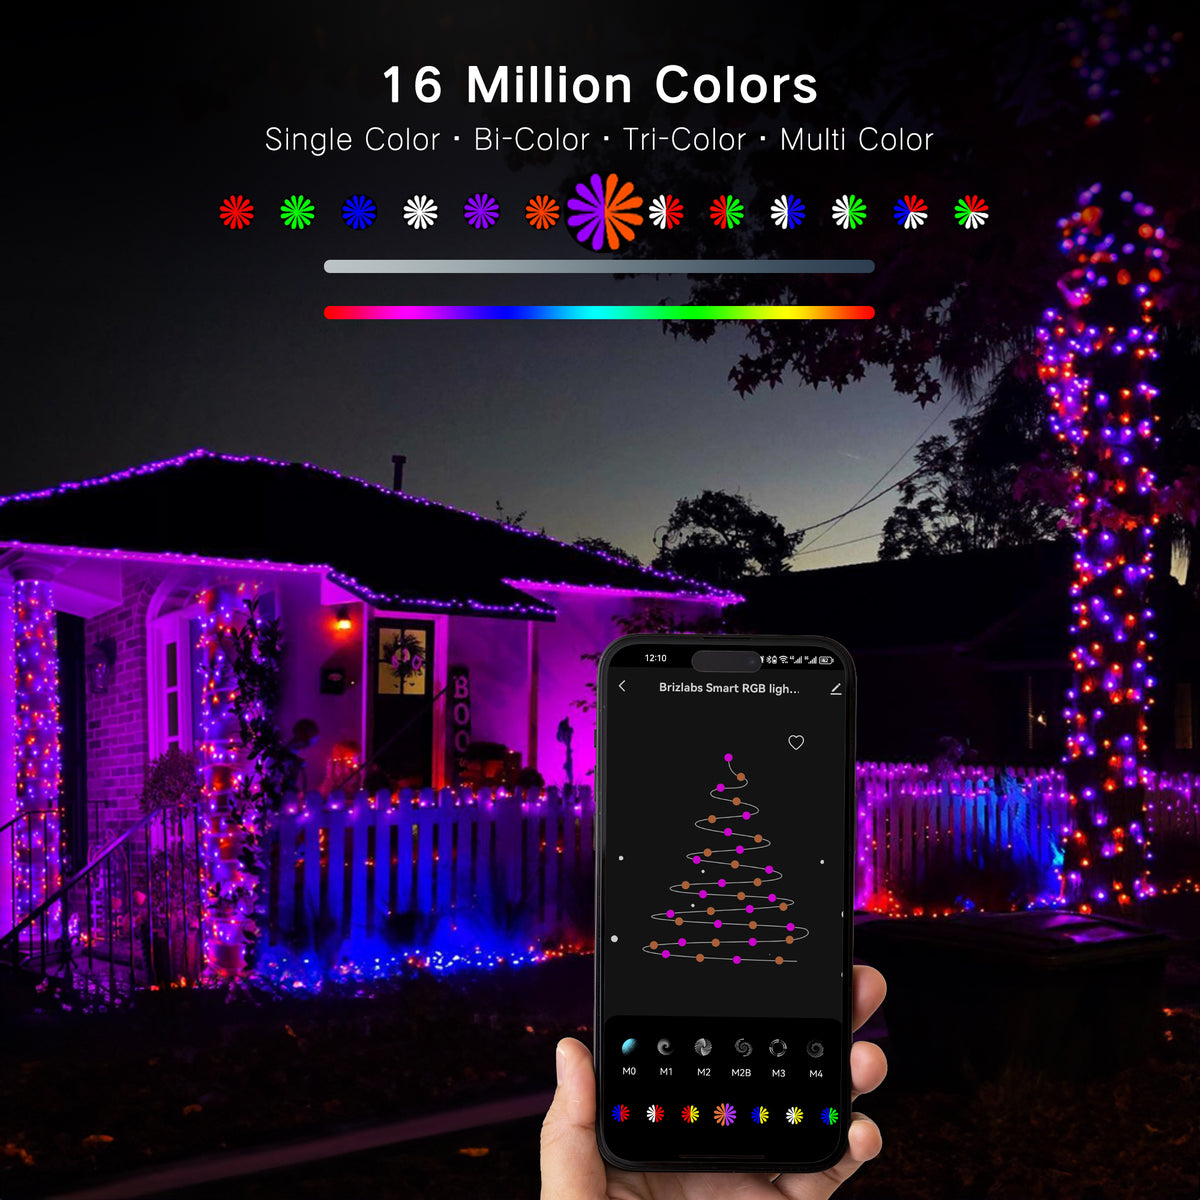 BrizLbas Smart RGB String Lights 196ft 600 LED App Controlled Work with Alexa & Google Home PREMIUM SERIES